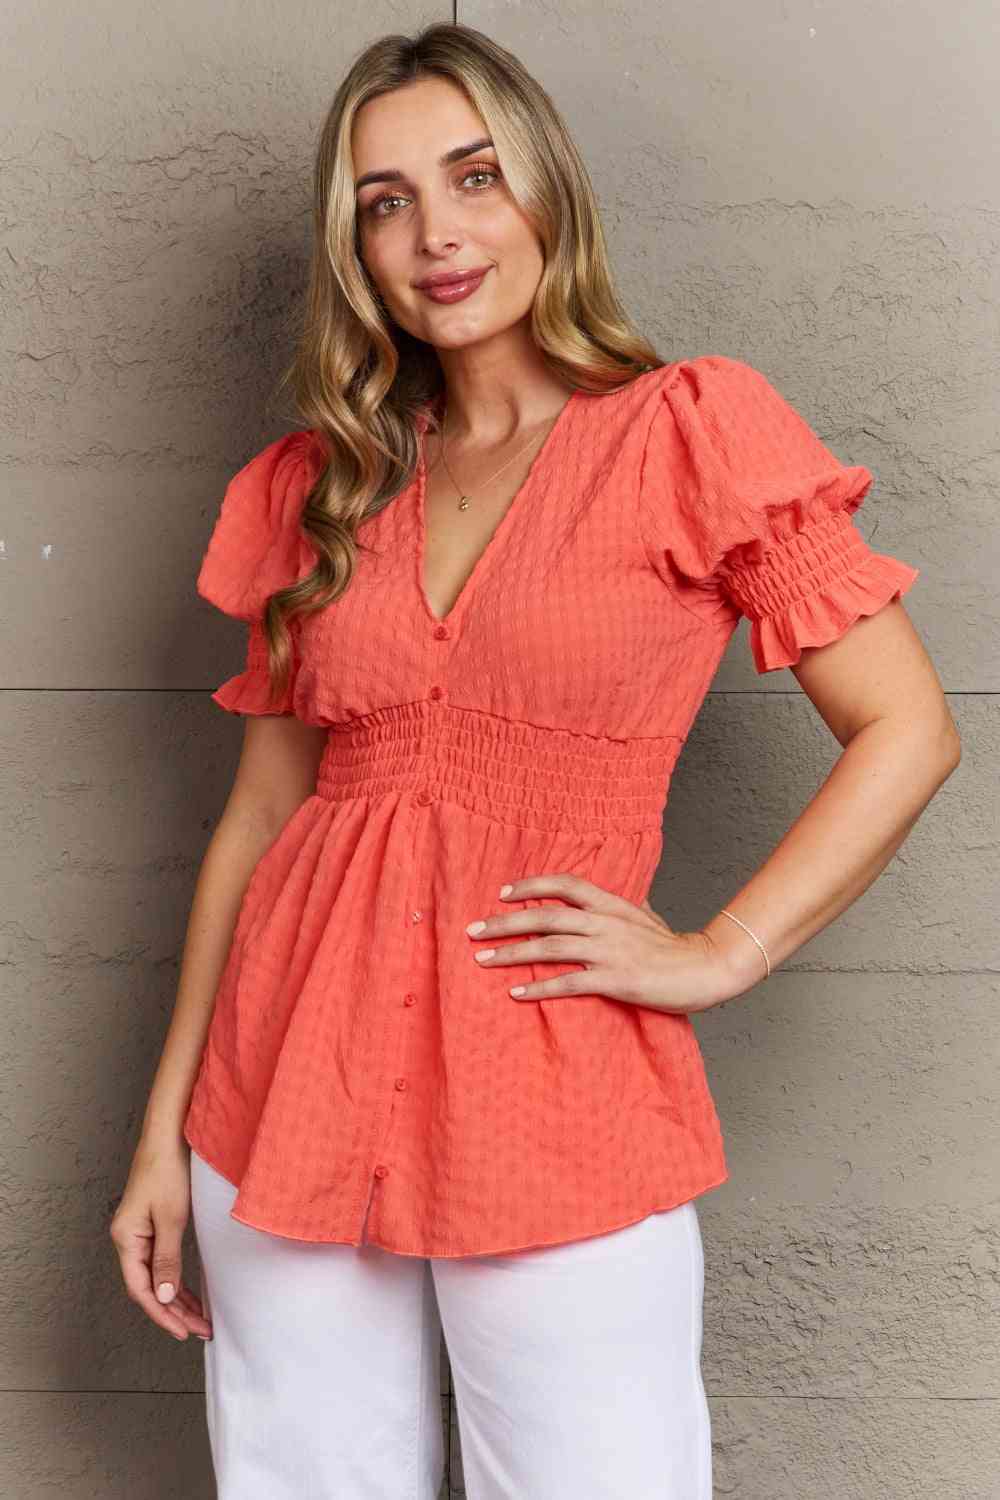 Whimsical Wonders Full Size V-Neck Puff Sleeve Button Down Top - Women’s Clothing & Accessories - Shirts & Tops - 7